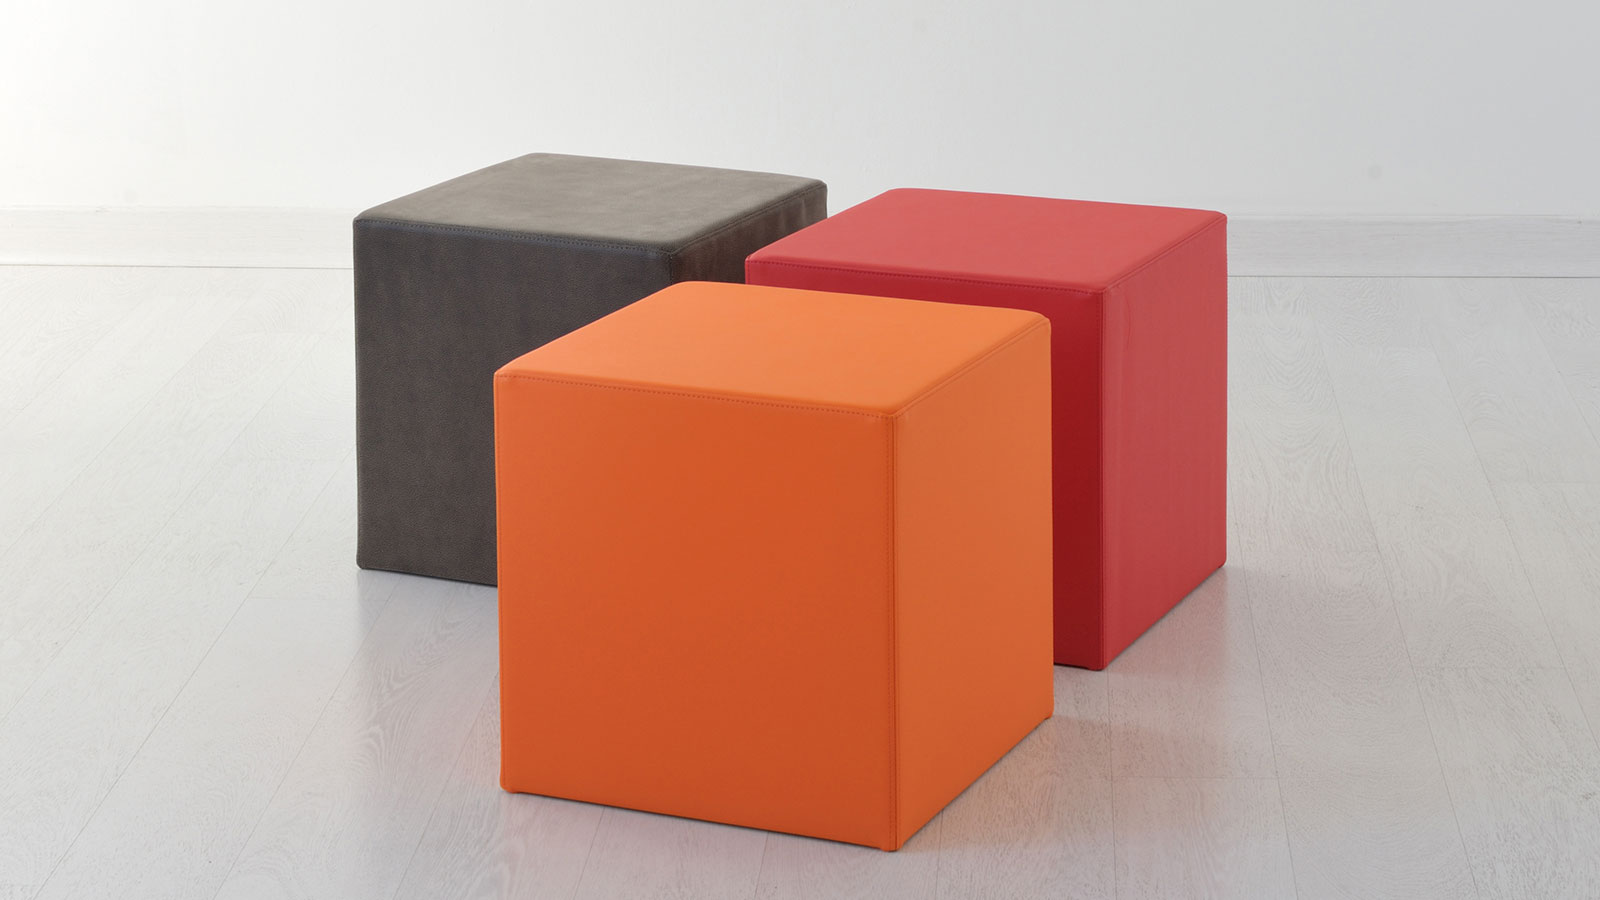 Furniture complement for additional accommodation. Squared (cubic) available in several colours and coverings of leather or fire resistant eco-leather.